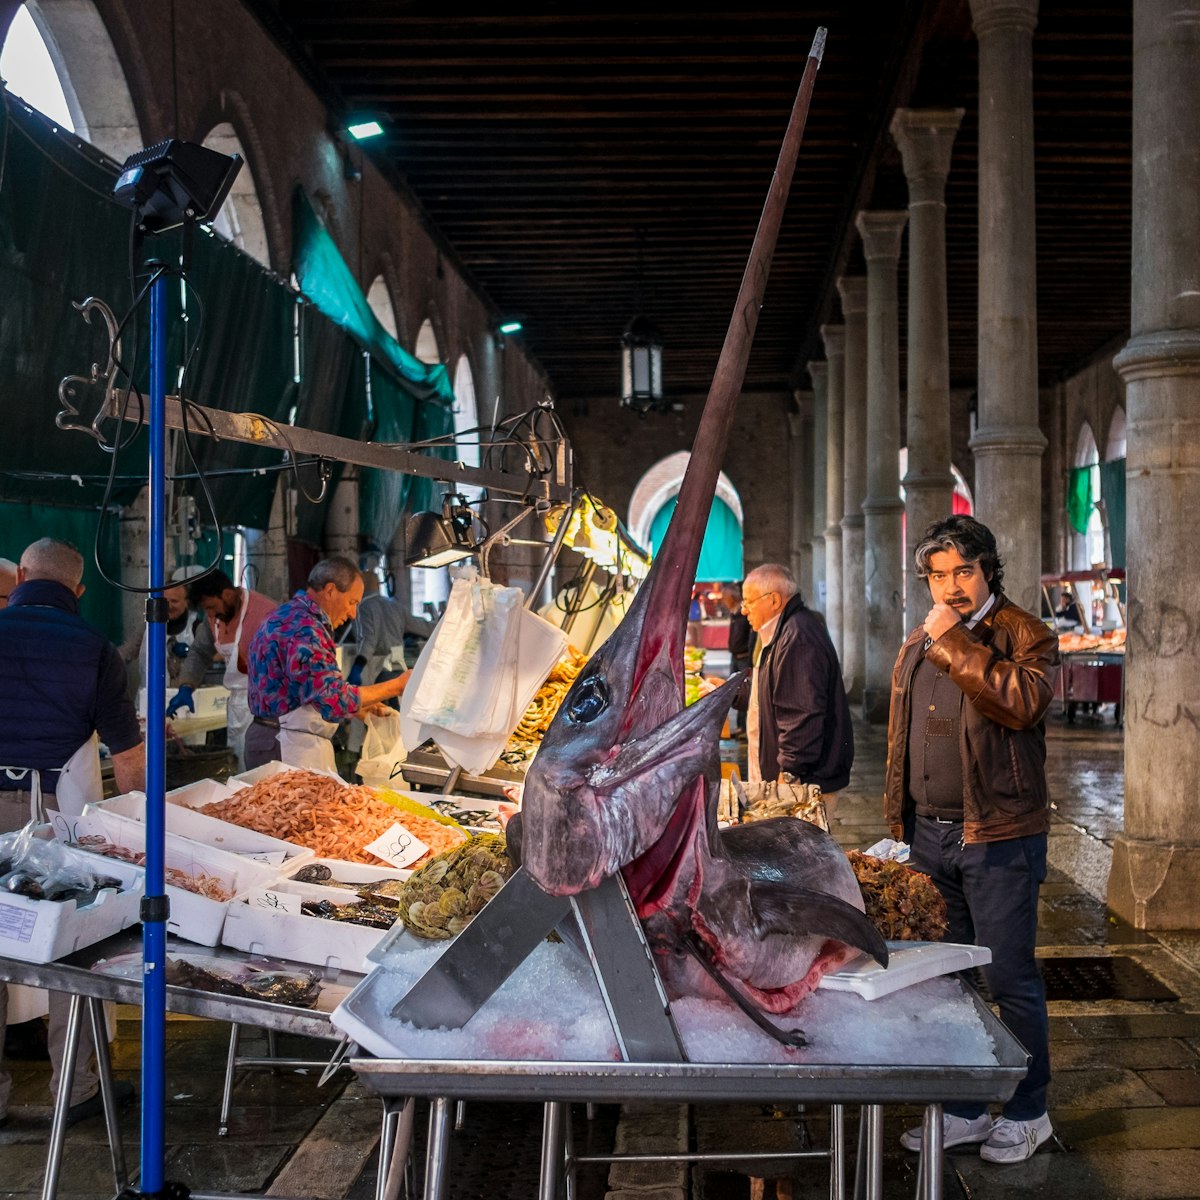 Venice, Italy - 5 April 2016:  Fishmongers set up their stalls with a variety of fresh fish, including giant swordfish, at the Rialto fish market, Venice, Italy
519462692
European Culture, Tourism, Men, Fame, Fish Vendor, Color Image, Swordfish, Prepared Fish, Swordfish, Trading, Market Stall, History, Freshness, Colors, International Landmark, Famous Place, Travel Destinations, Urban Scene, Trader, People, Rialto Bridge, Venice - Italy, Italy, Europe, Fish, Market, City, Seafood, Food